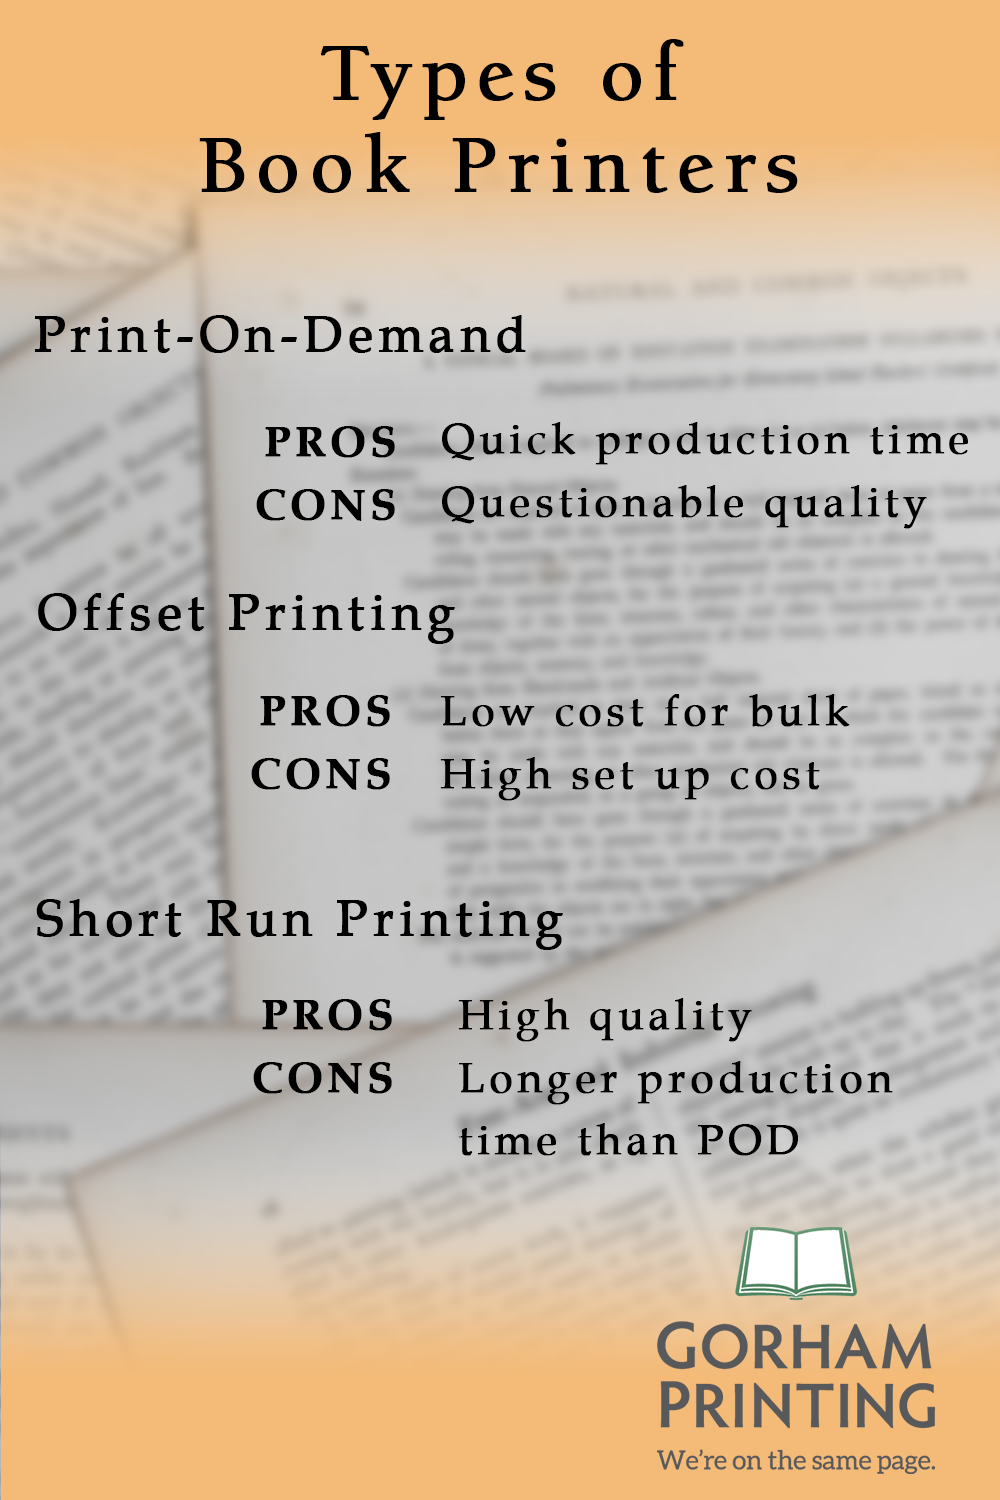 What to Look For in a Book Printer - Buy the Book